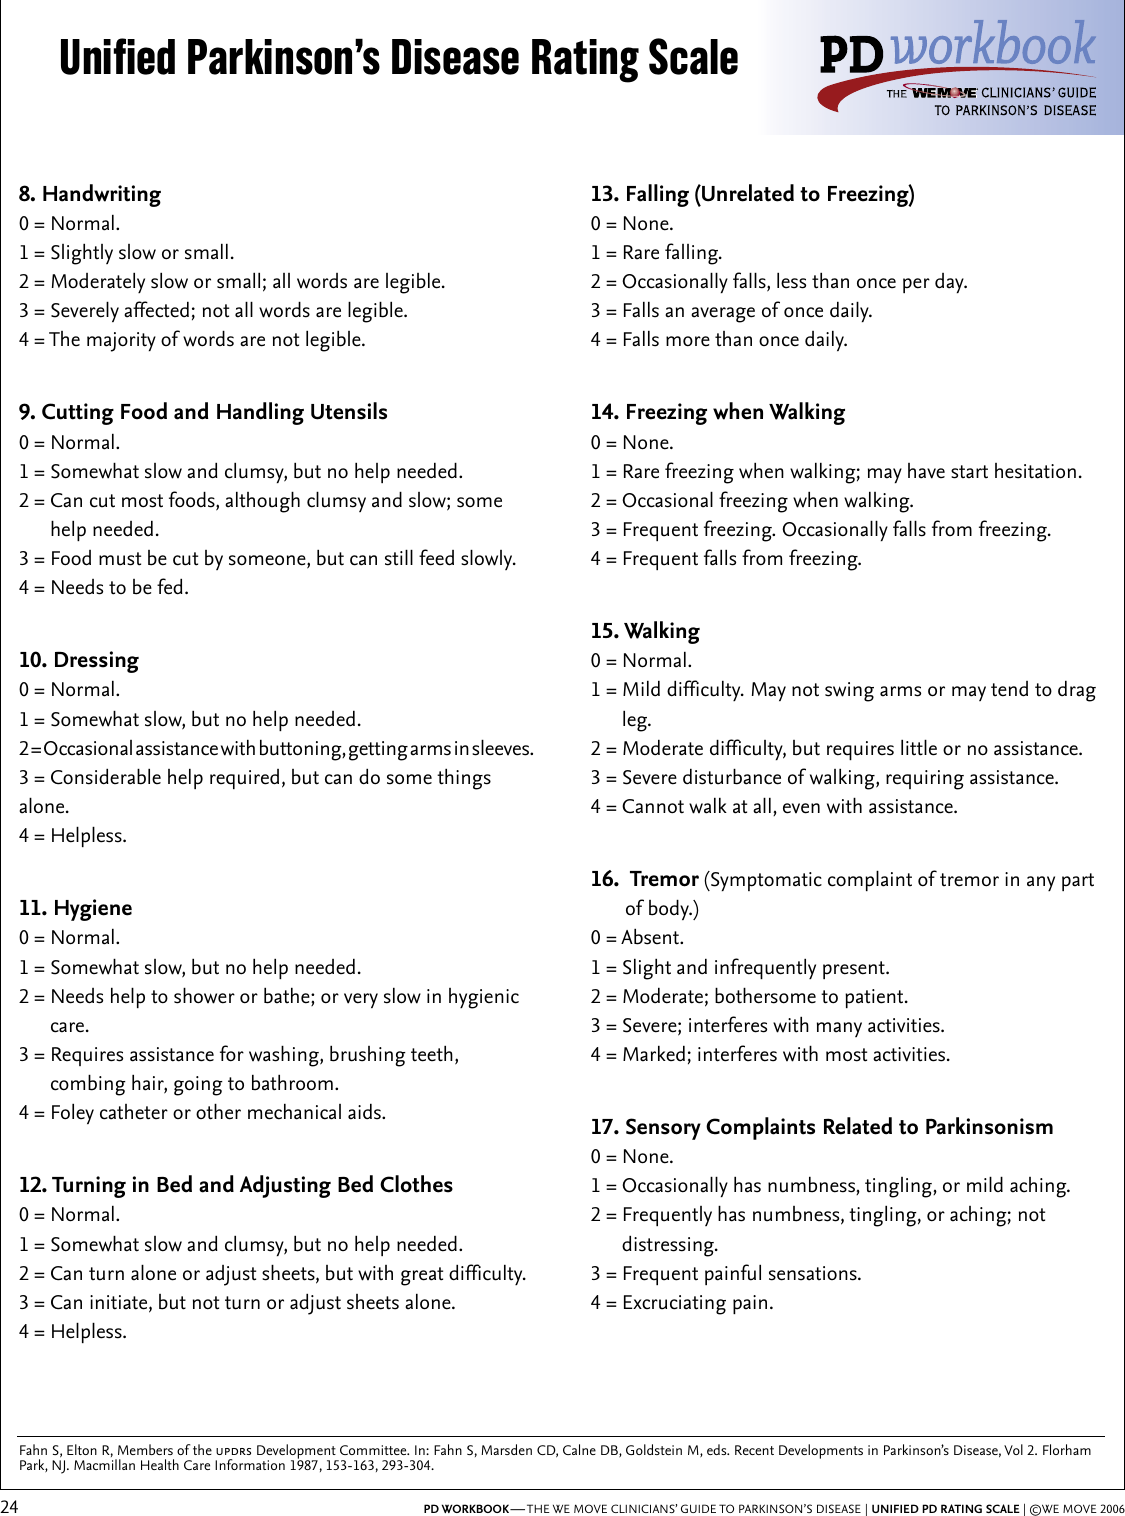 Page 2 of 8 - Rubric Guide